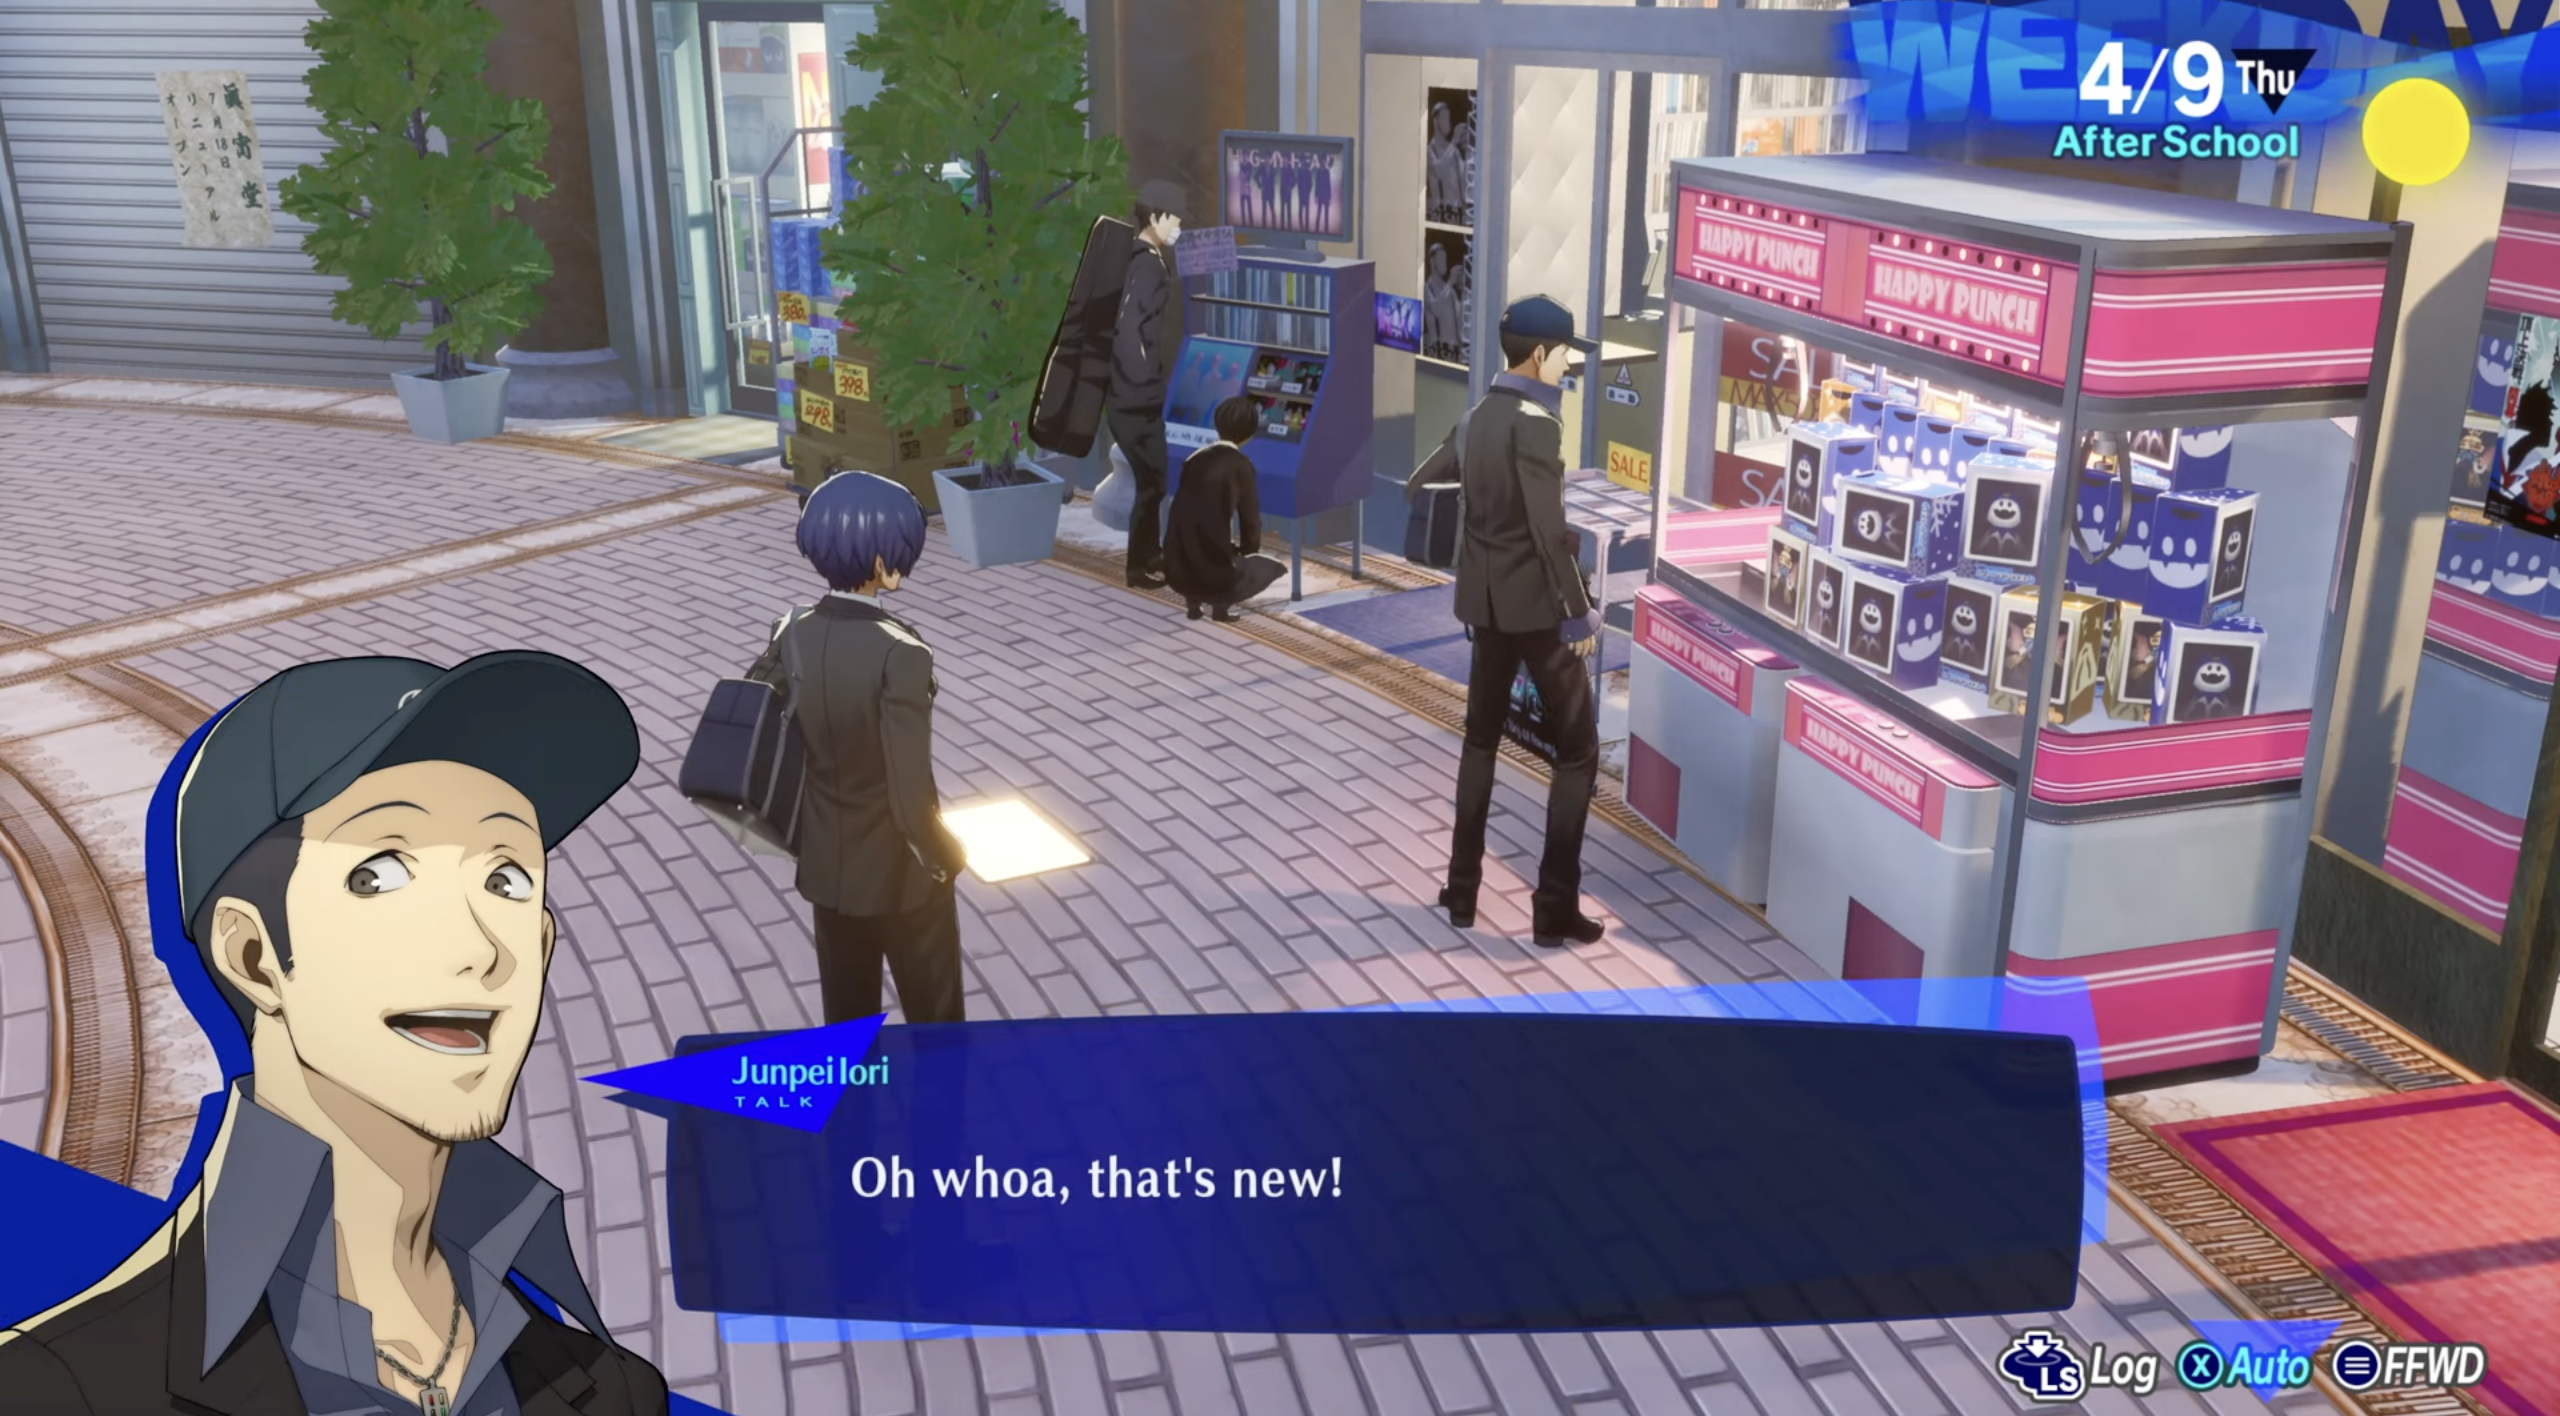 Persona 3 Reload Gets New Trailer Showcasing Gameplay & English